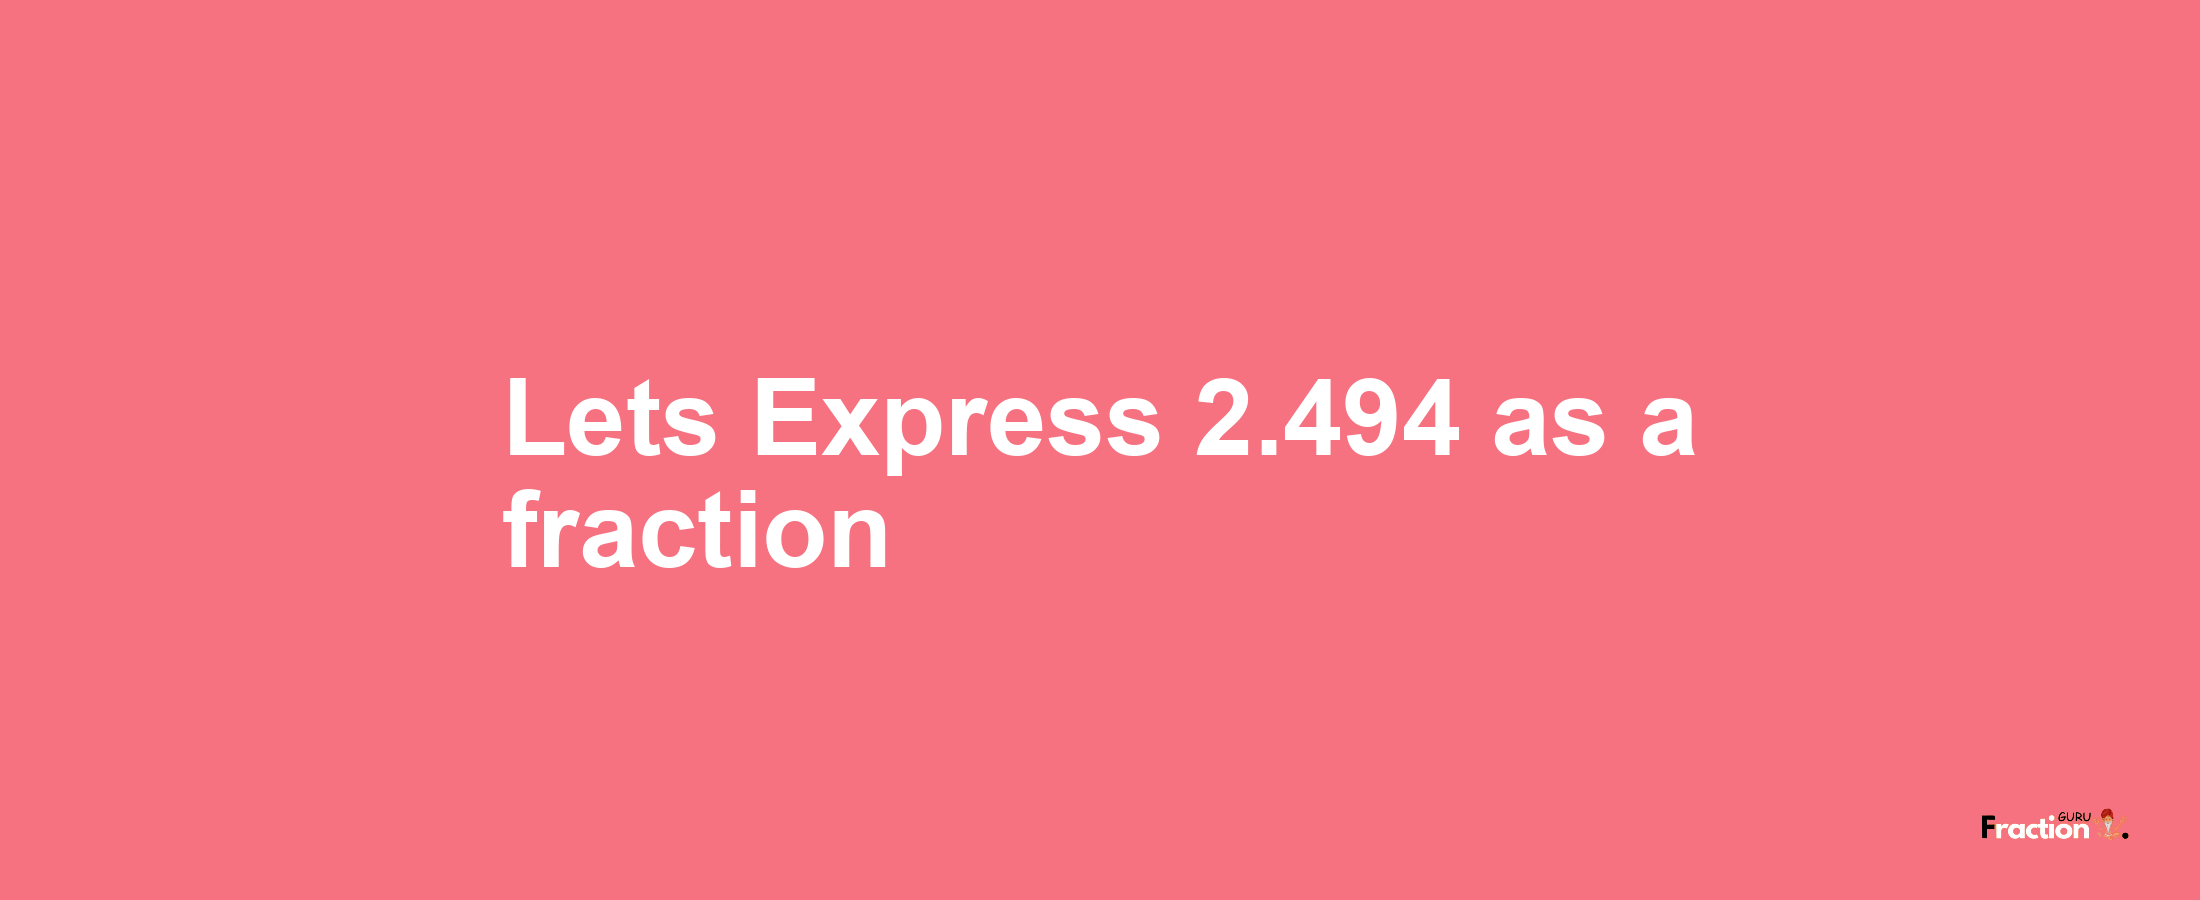 Lets Express 2.494 as afraction